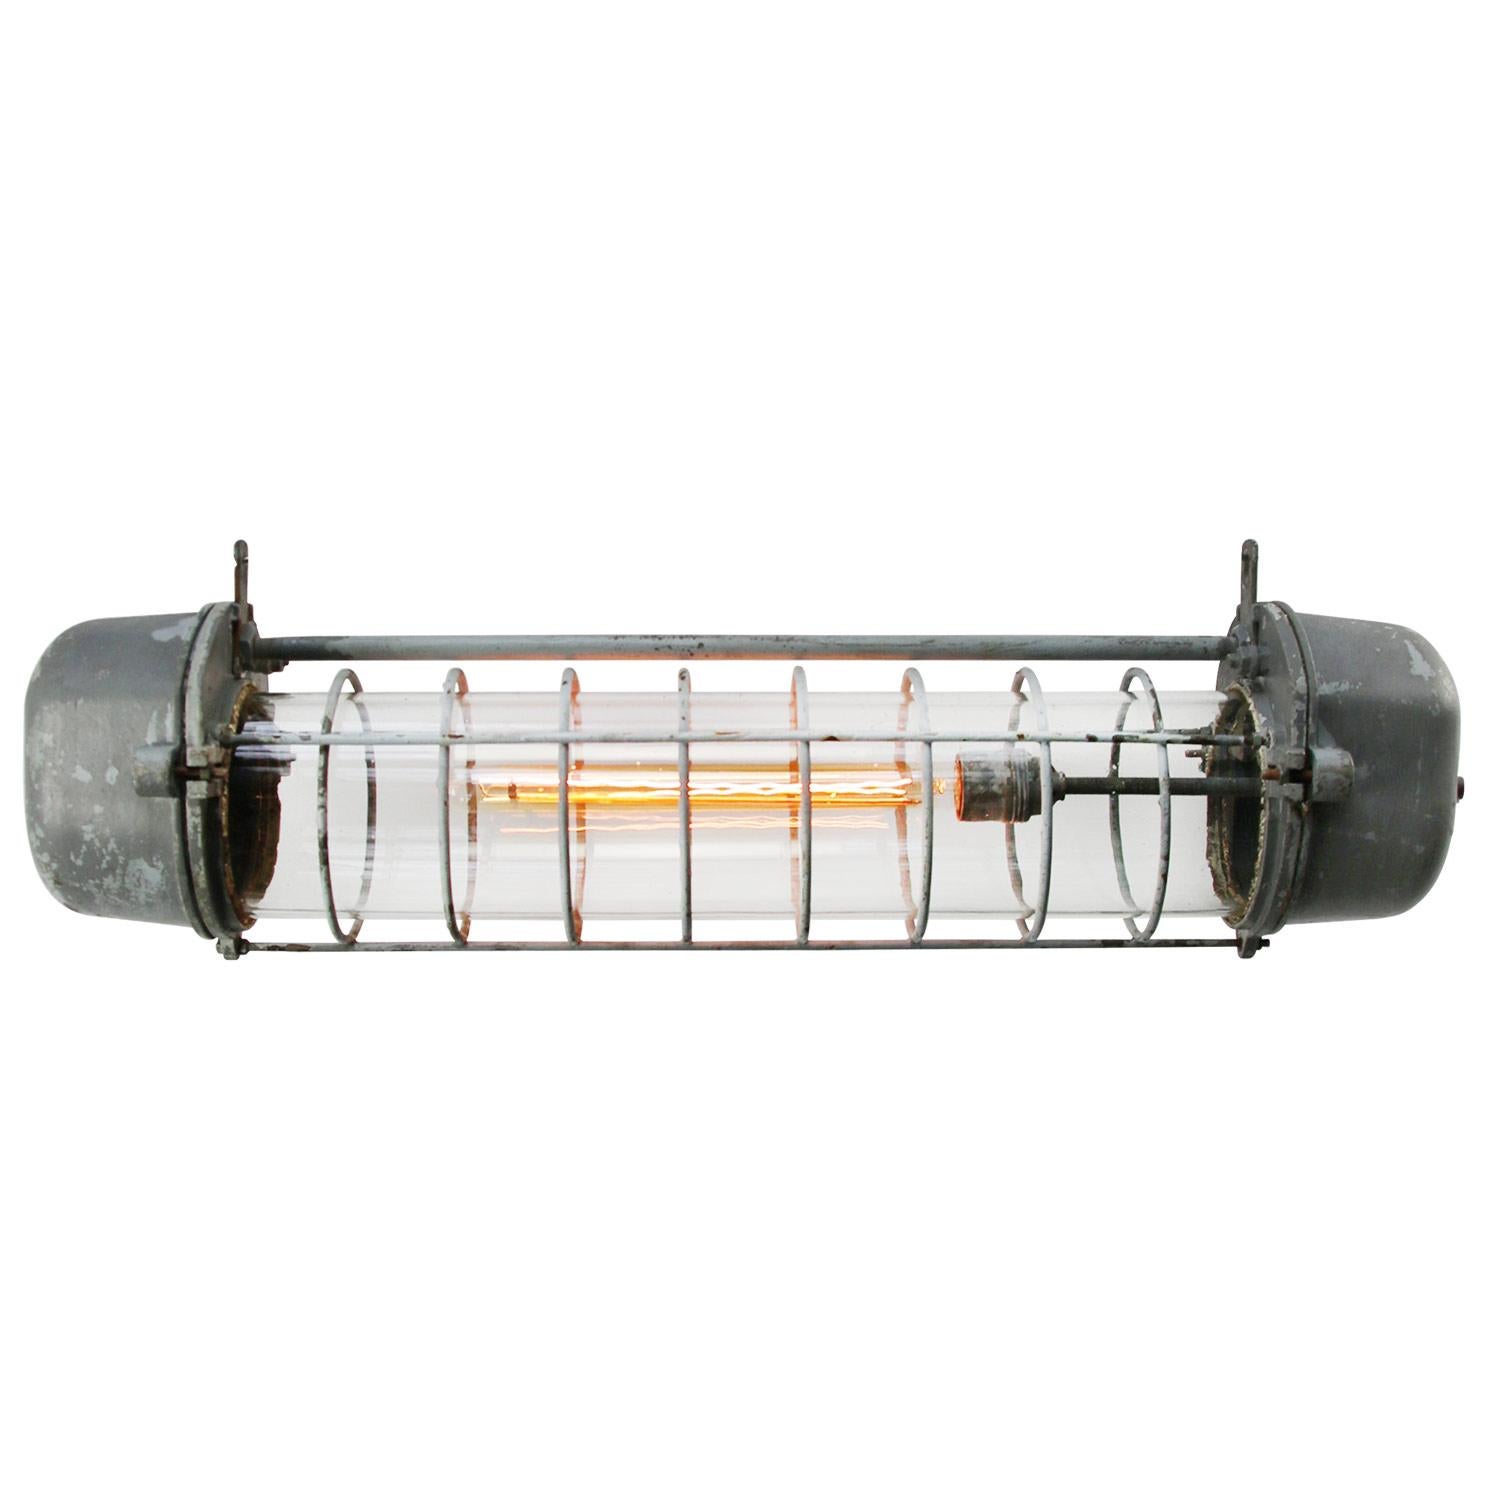 Industrial cast aluminum light.
Clear glass.

Weight 3.0 kg / 6.6 lb

Priced per individual item. All lamps have been made suitable by international standards for incandescent light bulbs, energy-efficient and LED bulbs. E26/E27 bulb holders